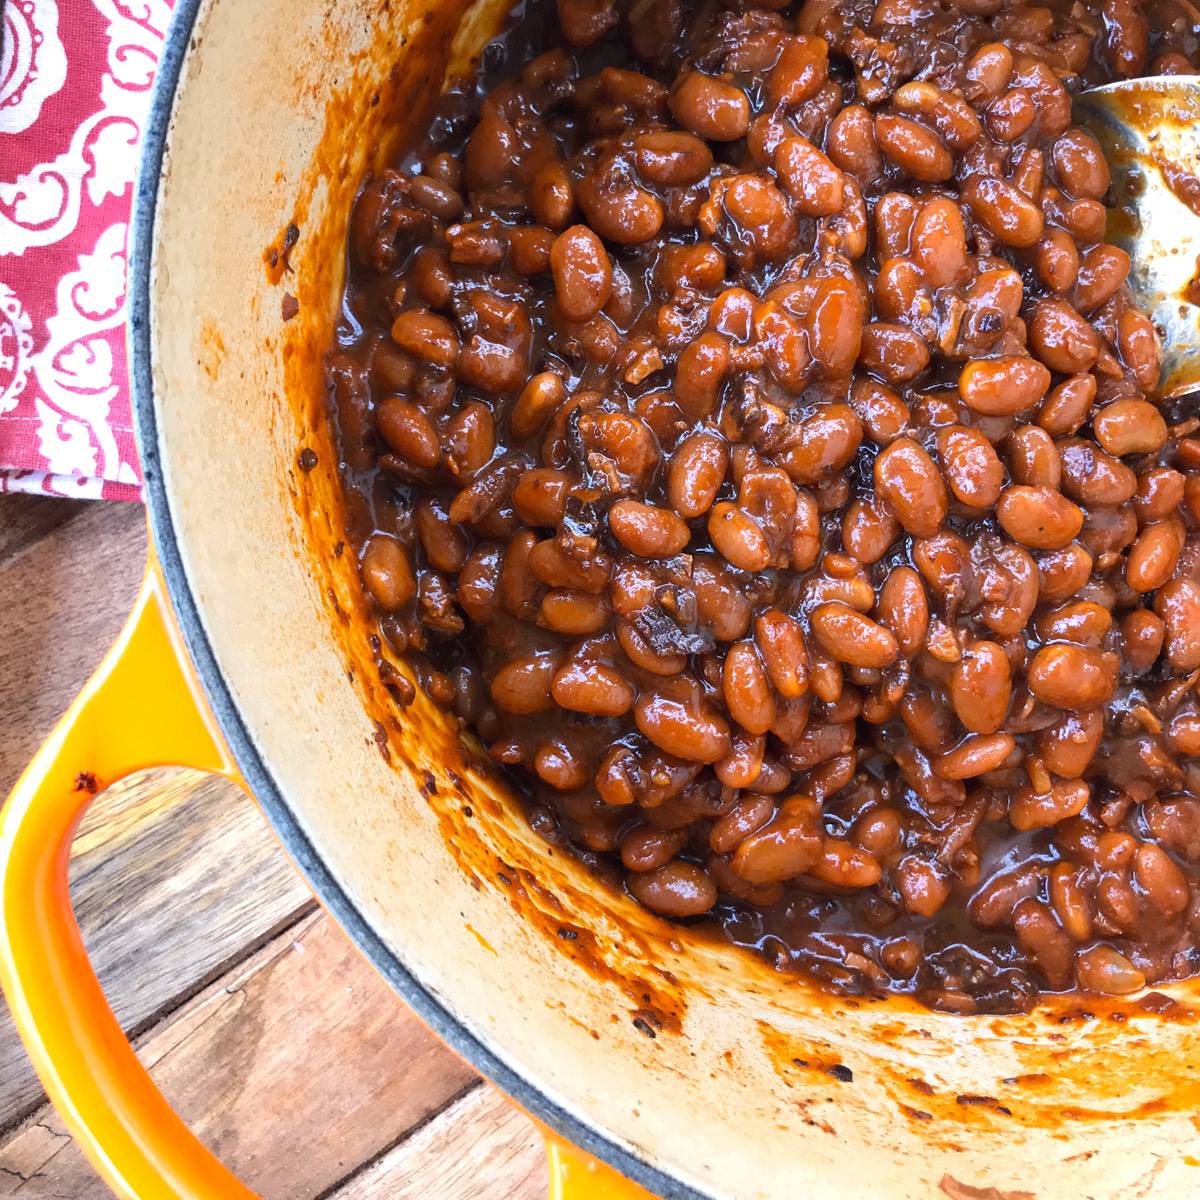 baked beans recipe from scratch homemade best bacon pork oven slow cooker crock pot old fashioned traditional classic